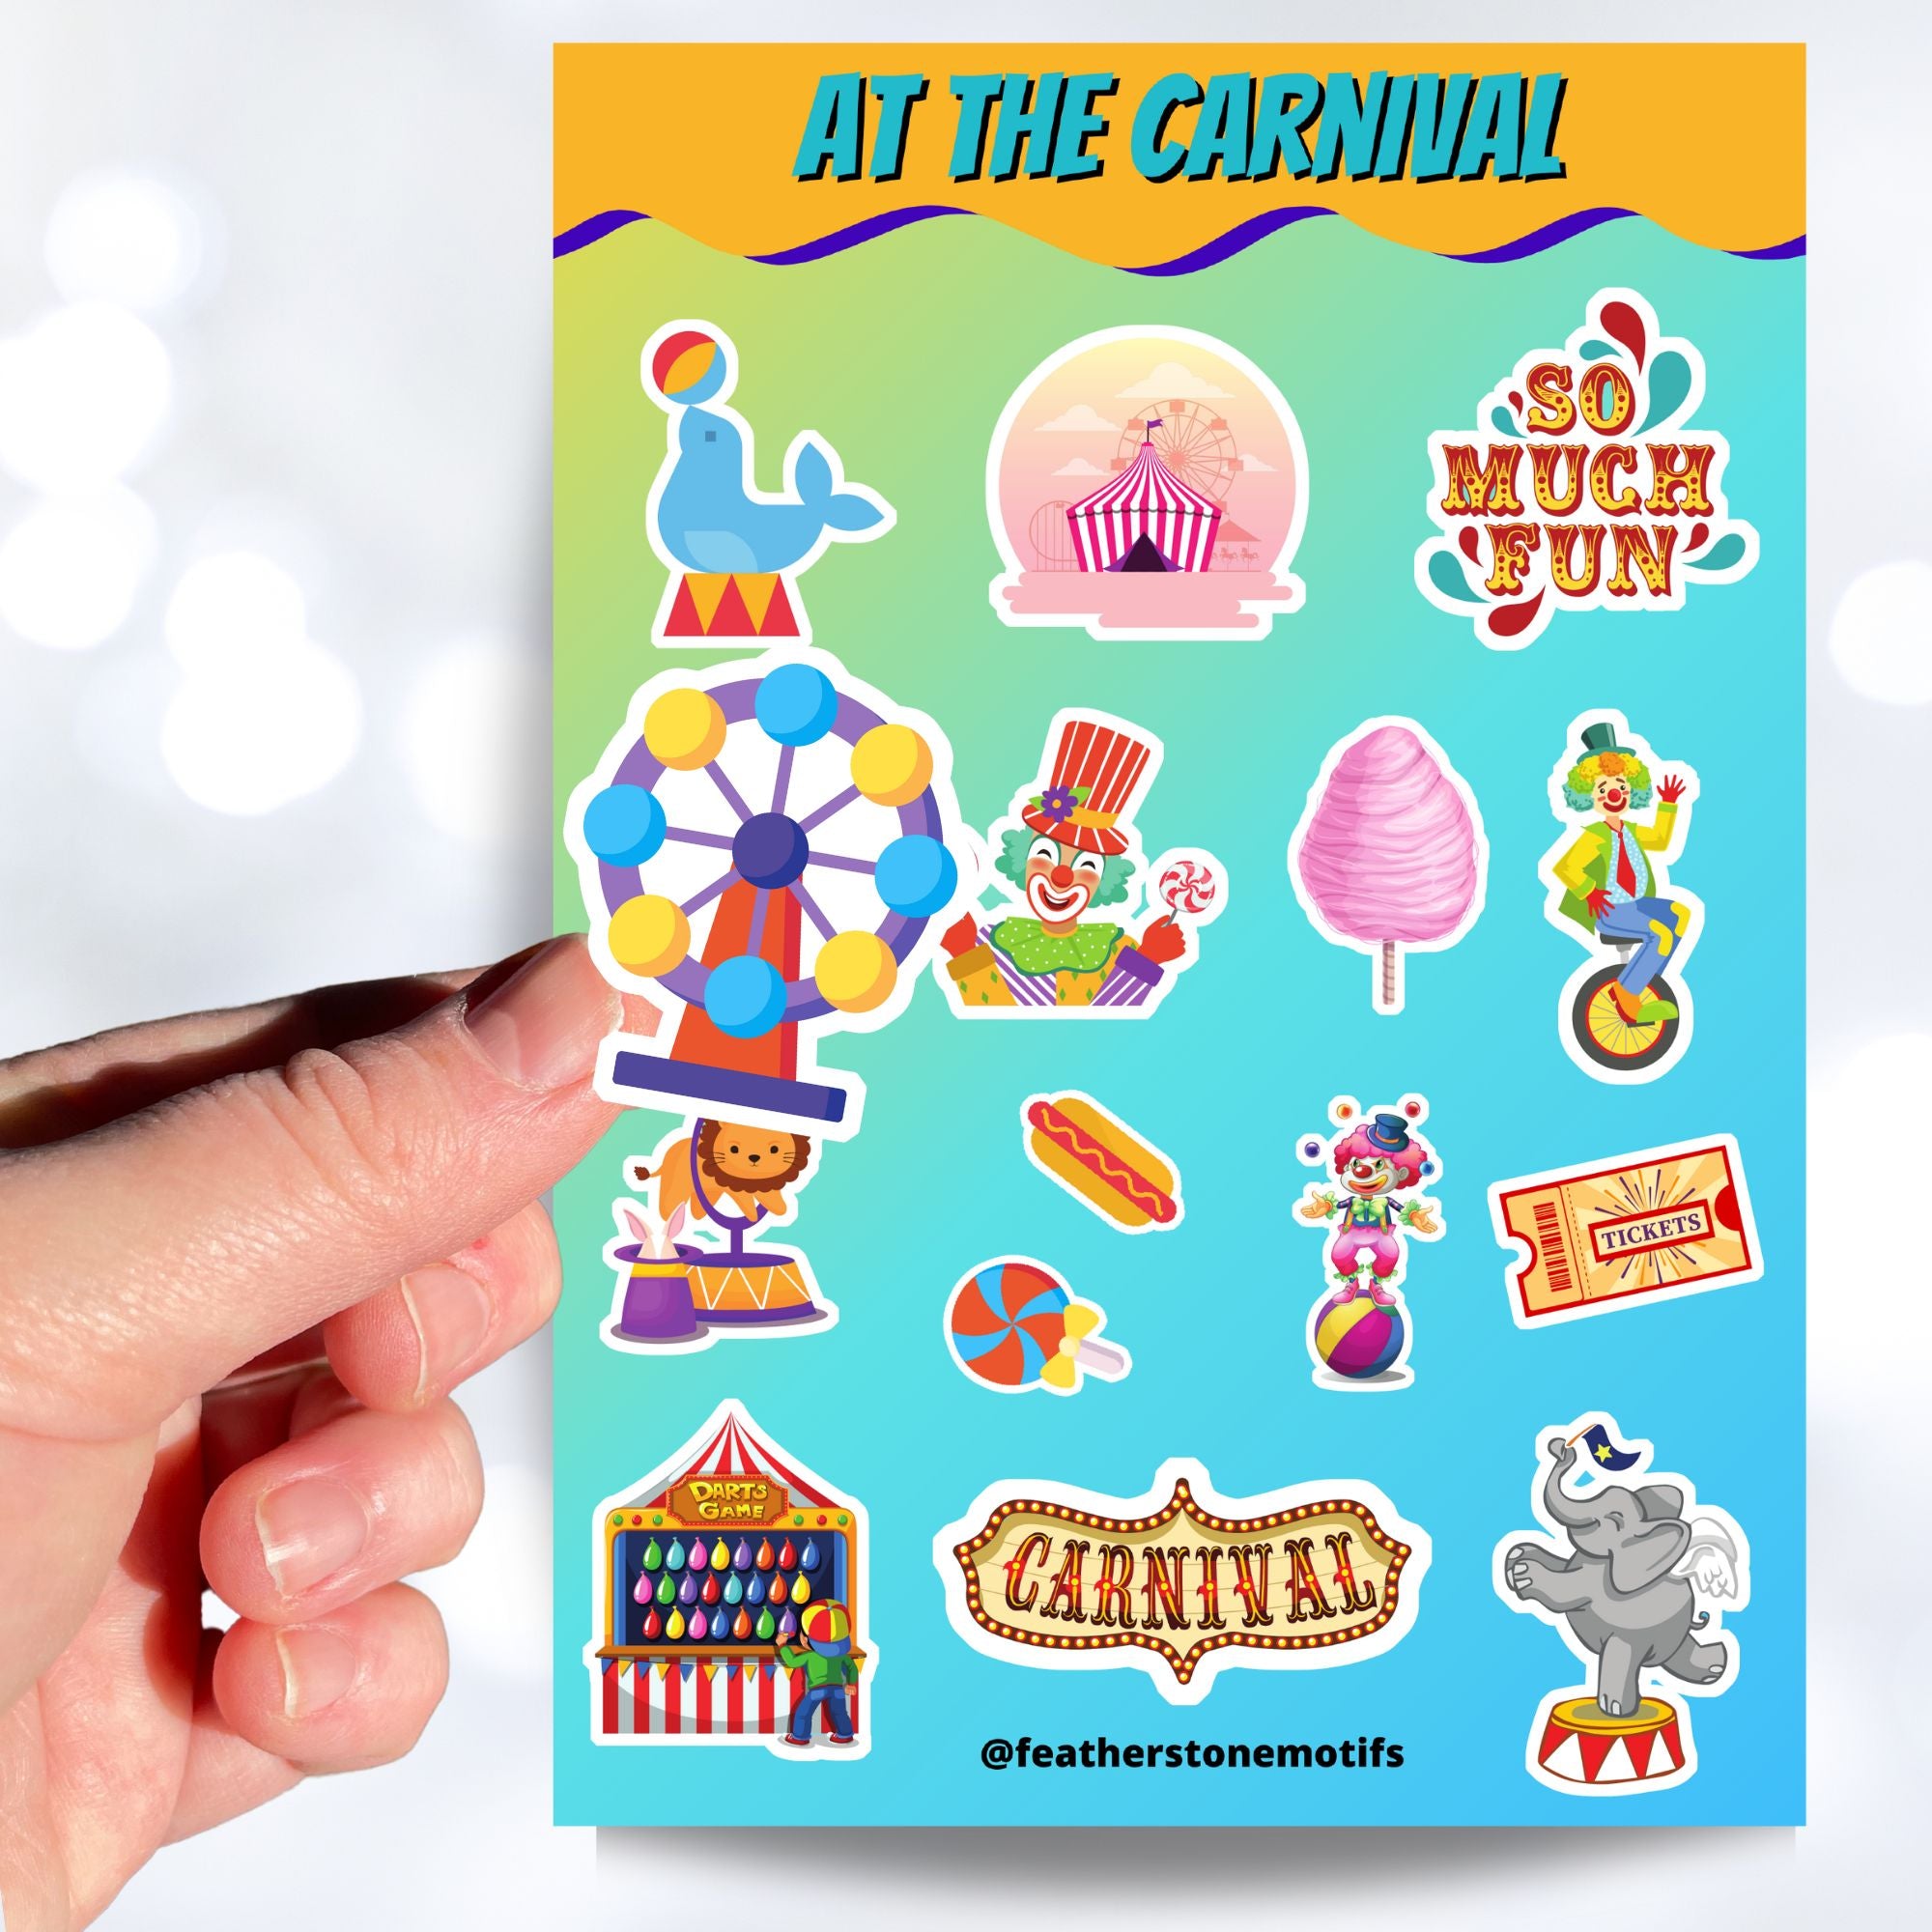 Who doesn't love going to the carnival? This sheet has stickers showing the big top, clowns, animals, and of course your favorite foods like hotdogs and cotton candy. This is an image of a hand holding one of the stickers above the sticker sheet.